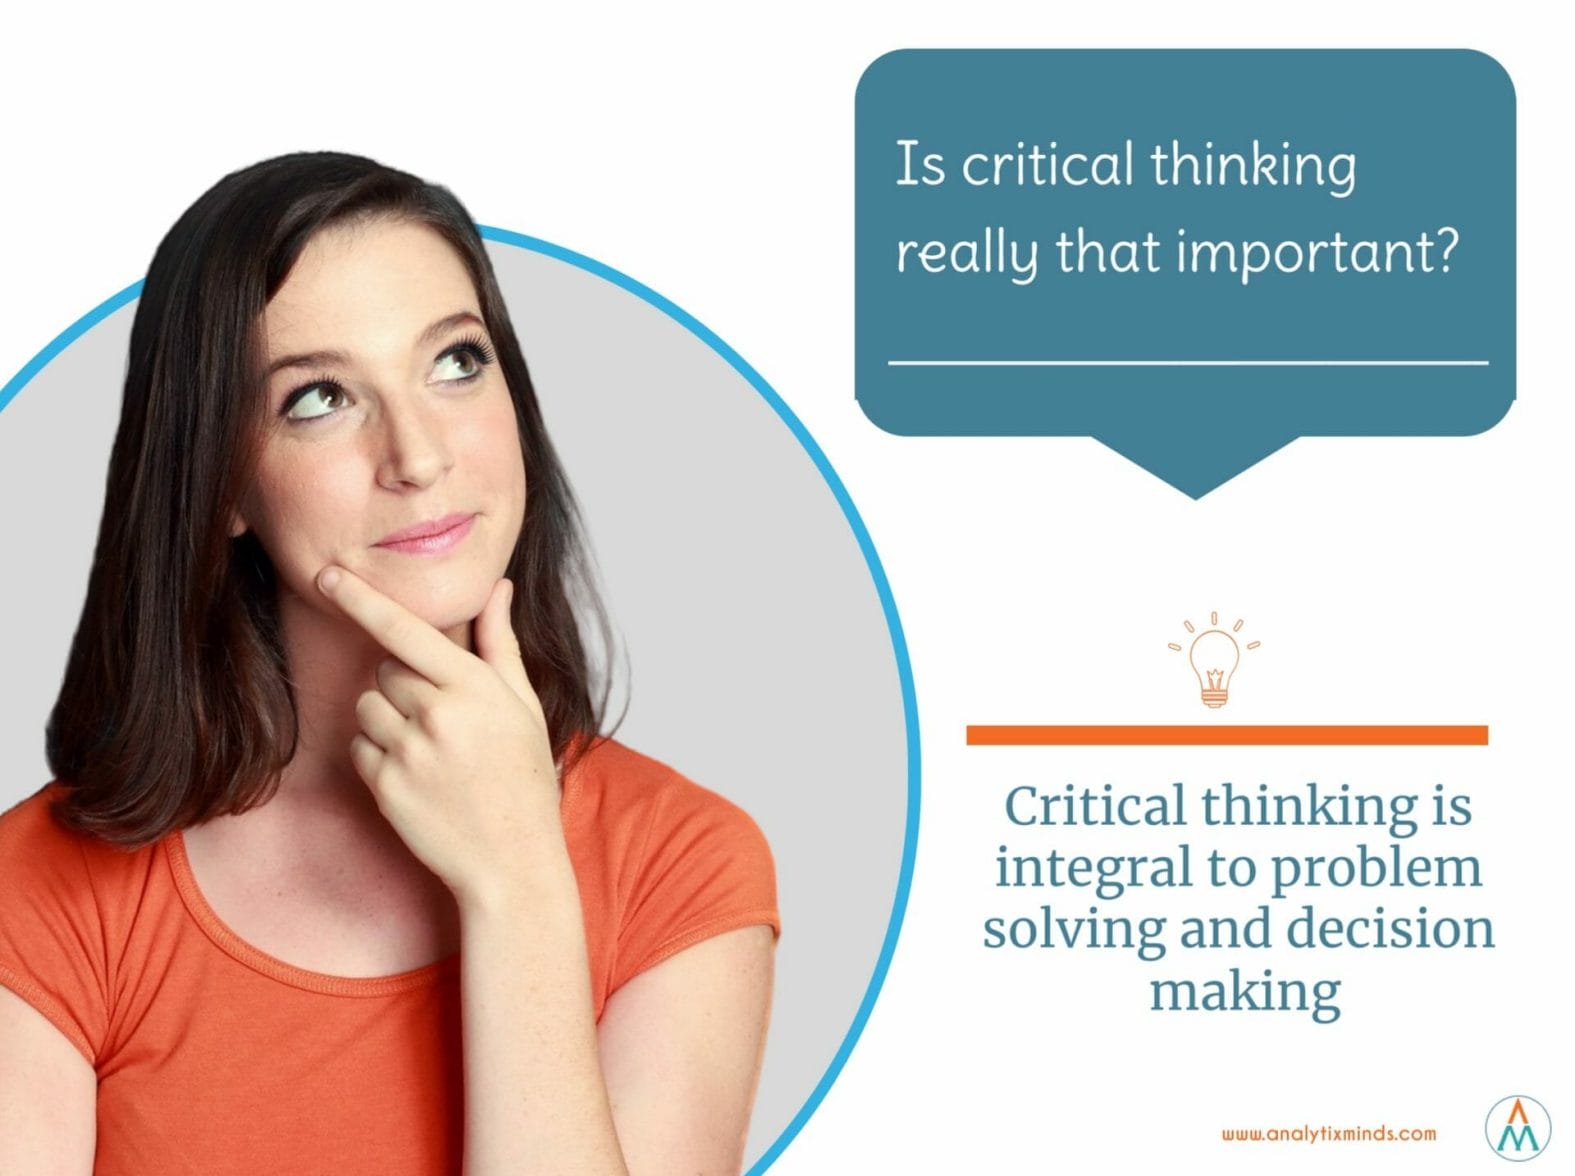 why is critical thinking important when evaluating scientific information